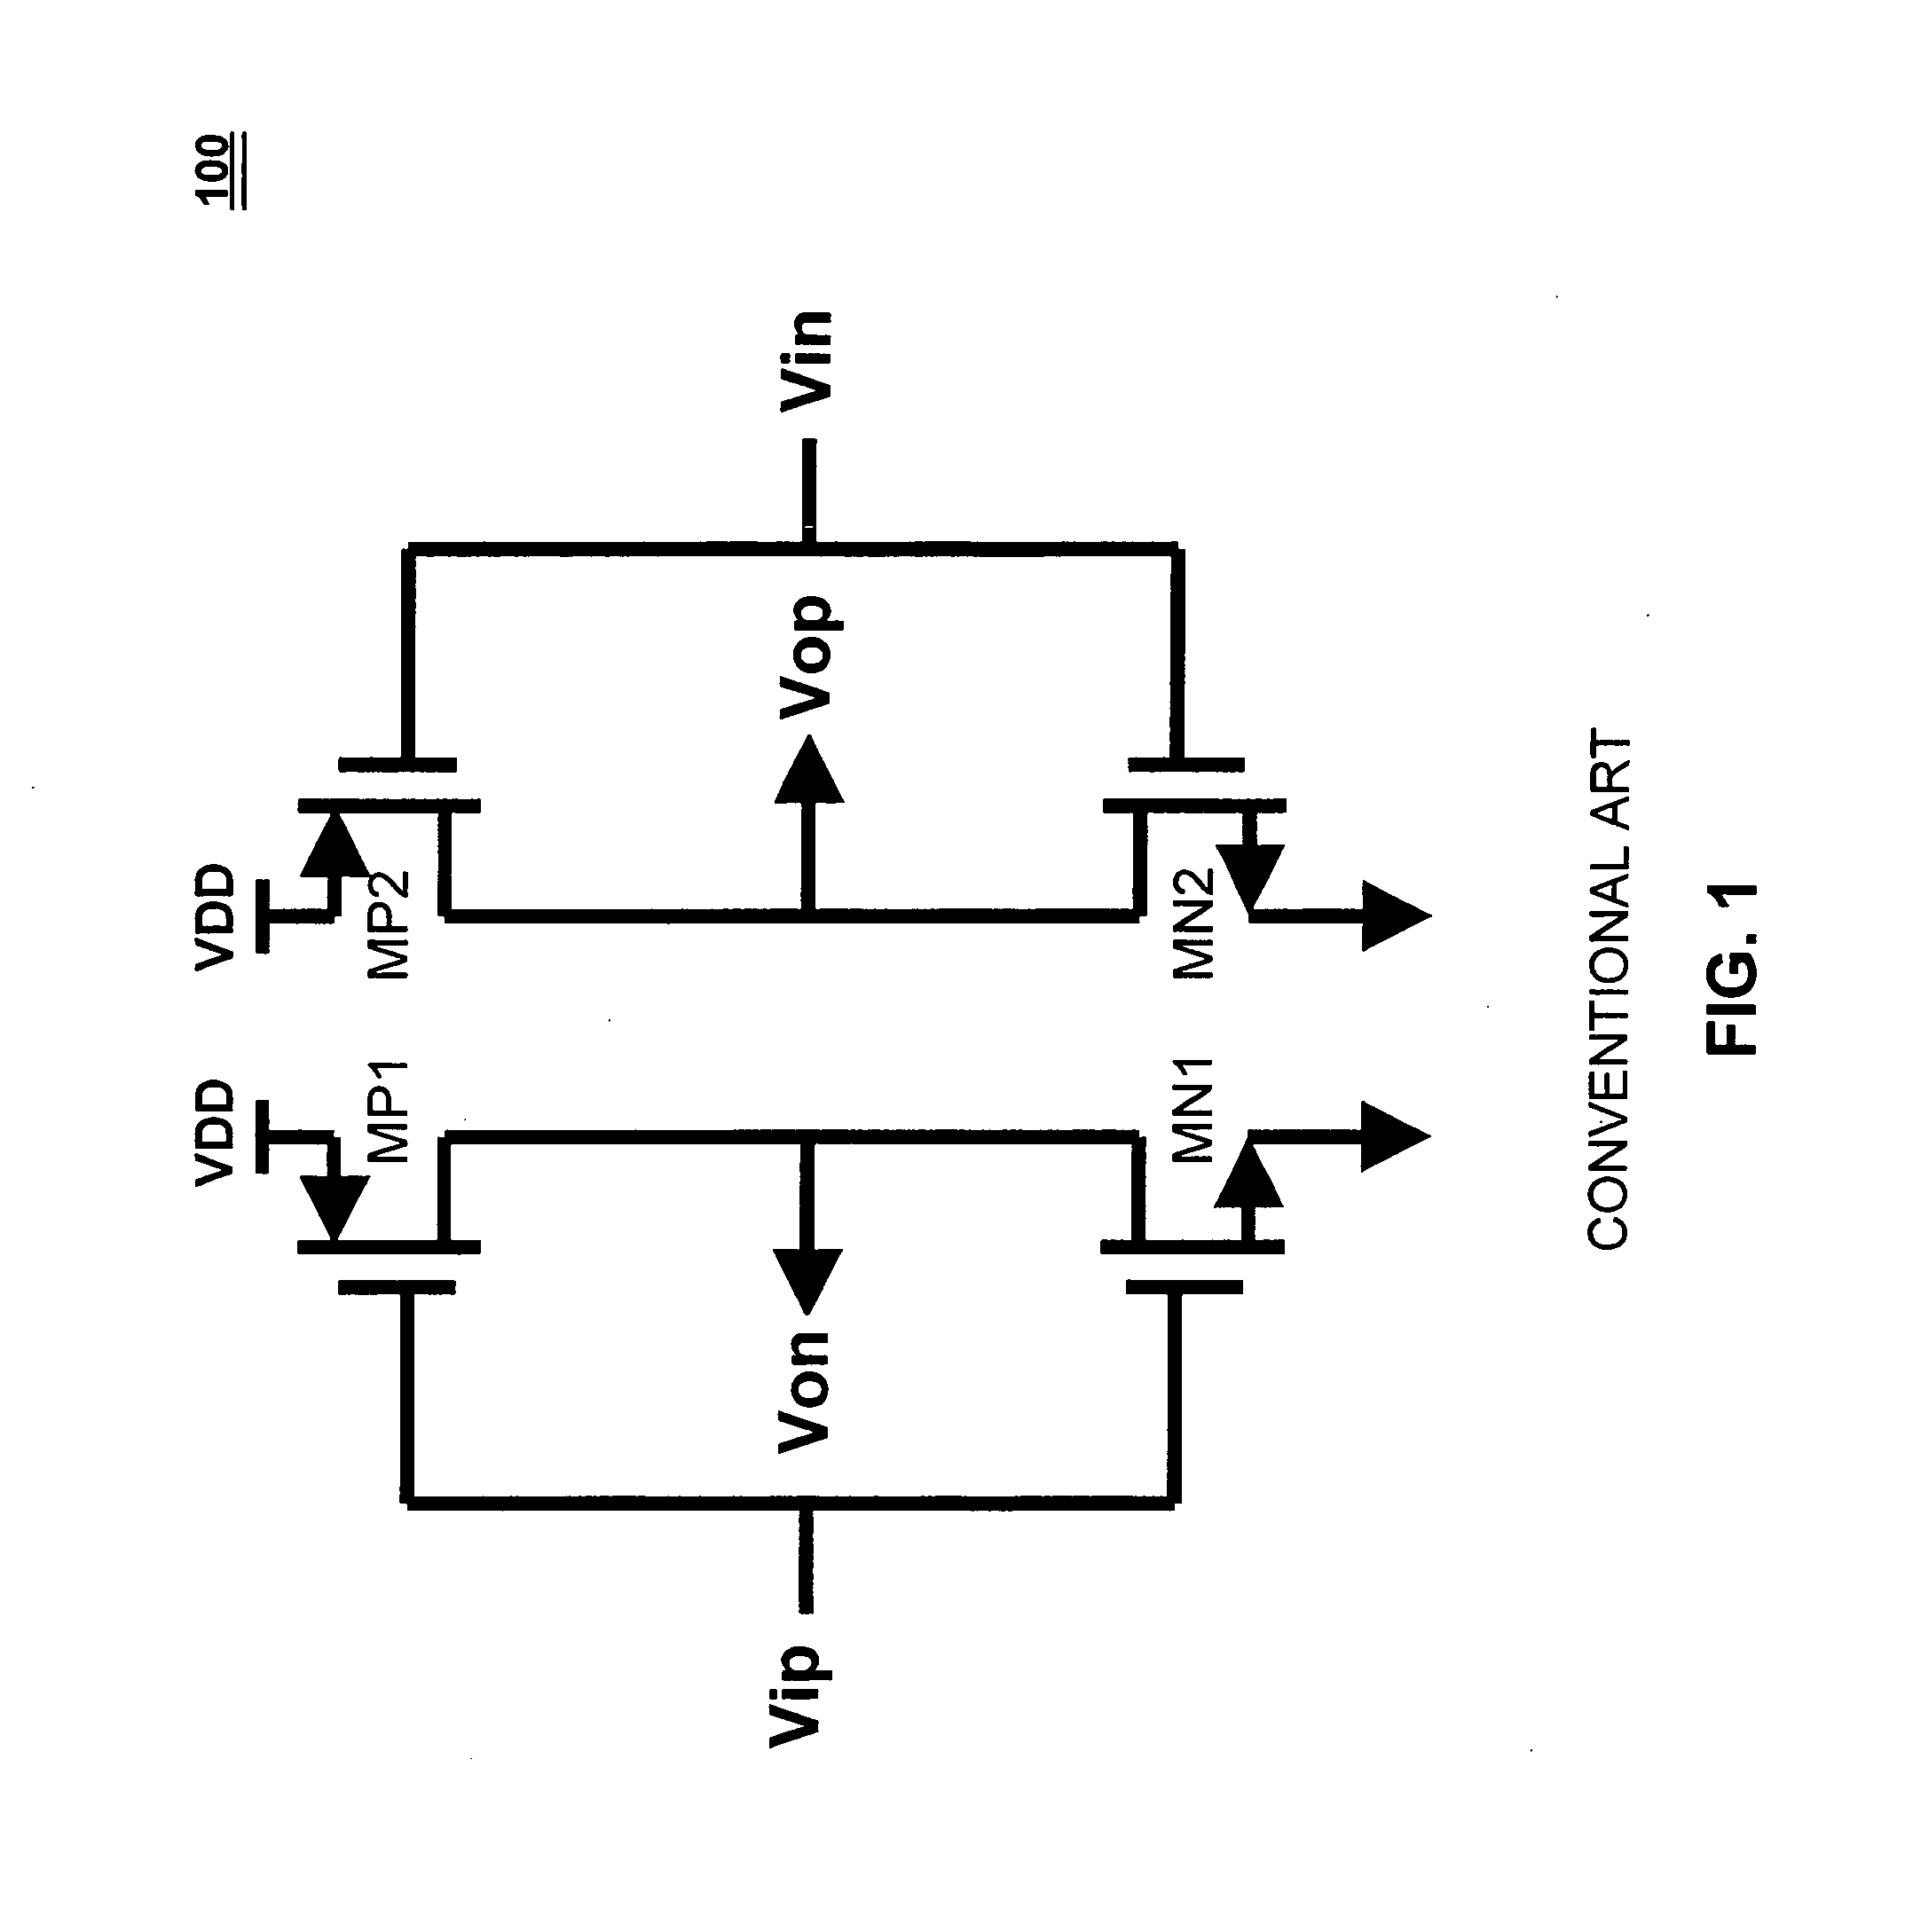 Series terminated CMOS output driver with impedance calibration